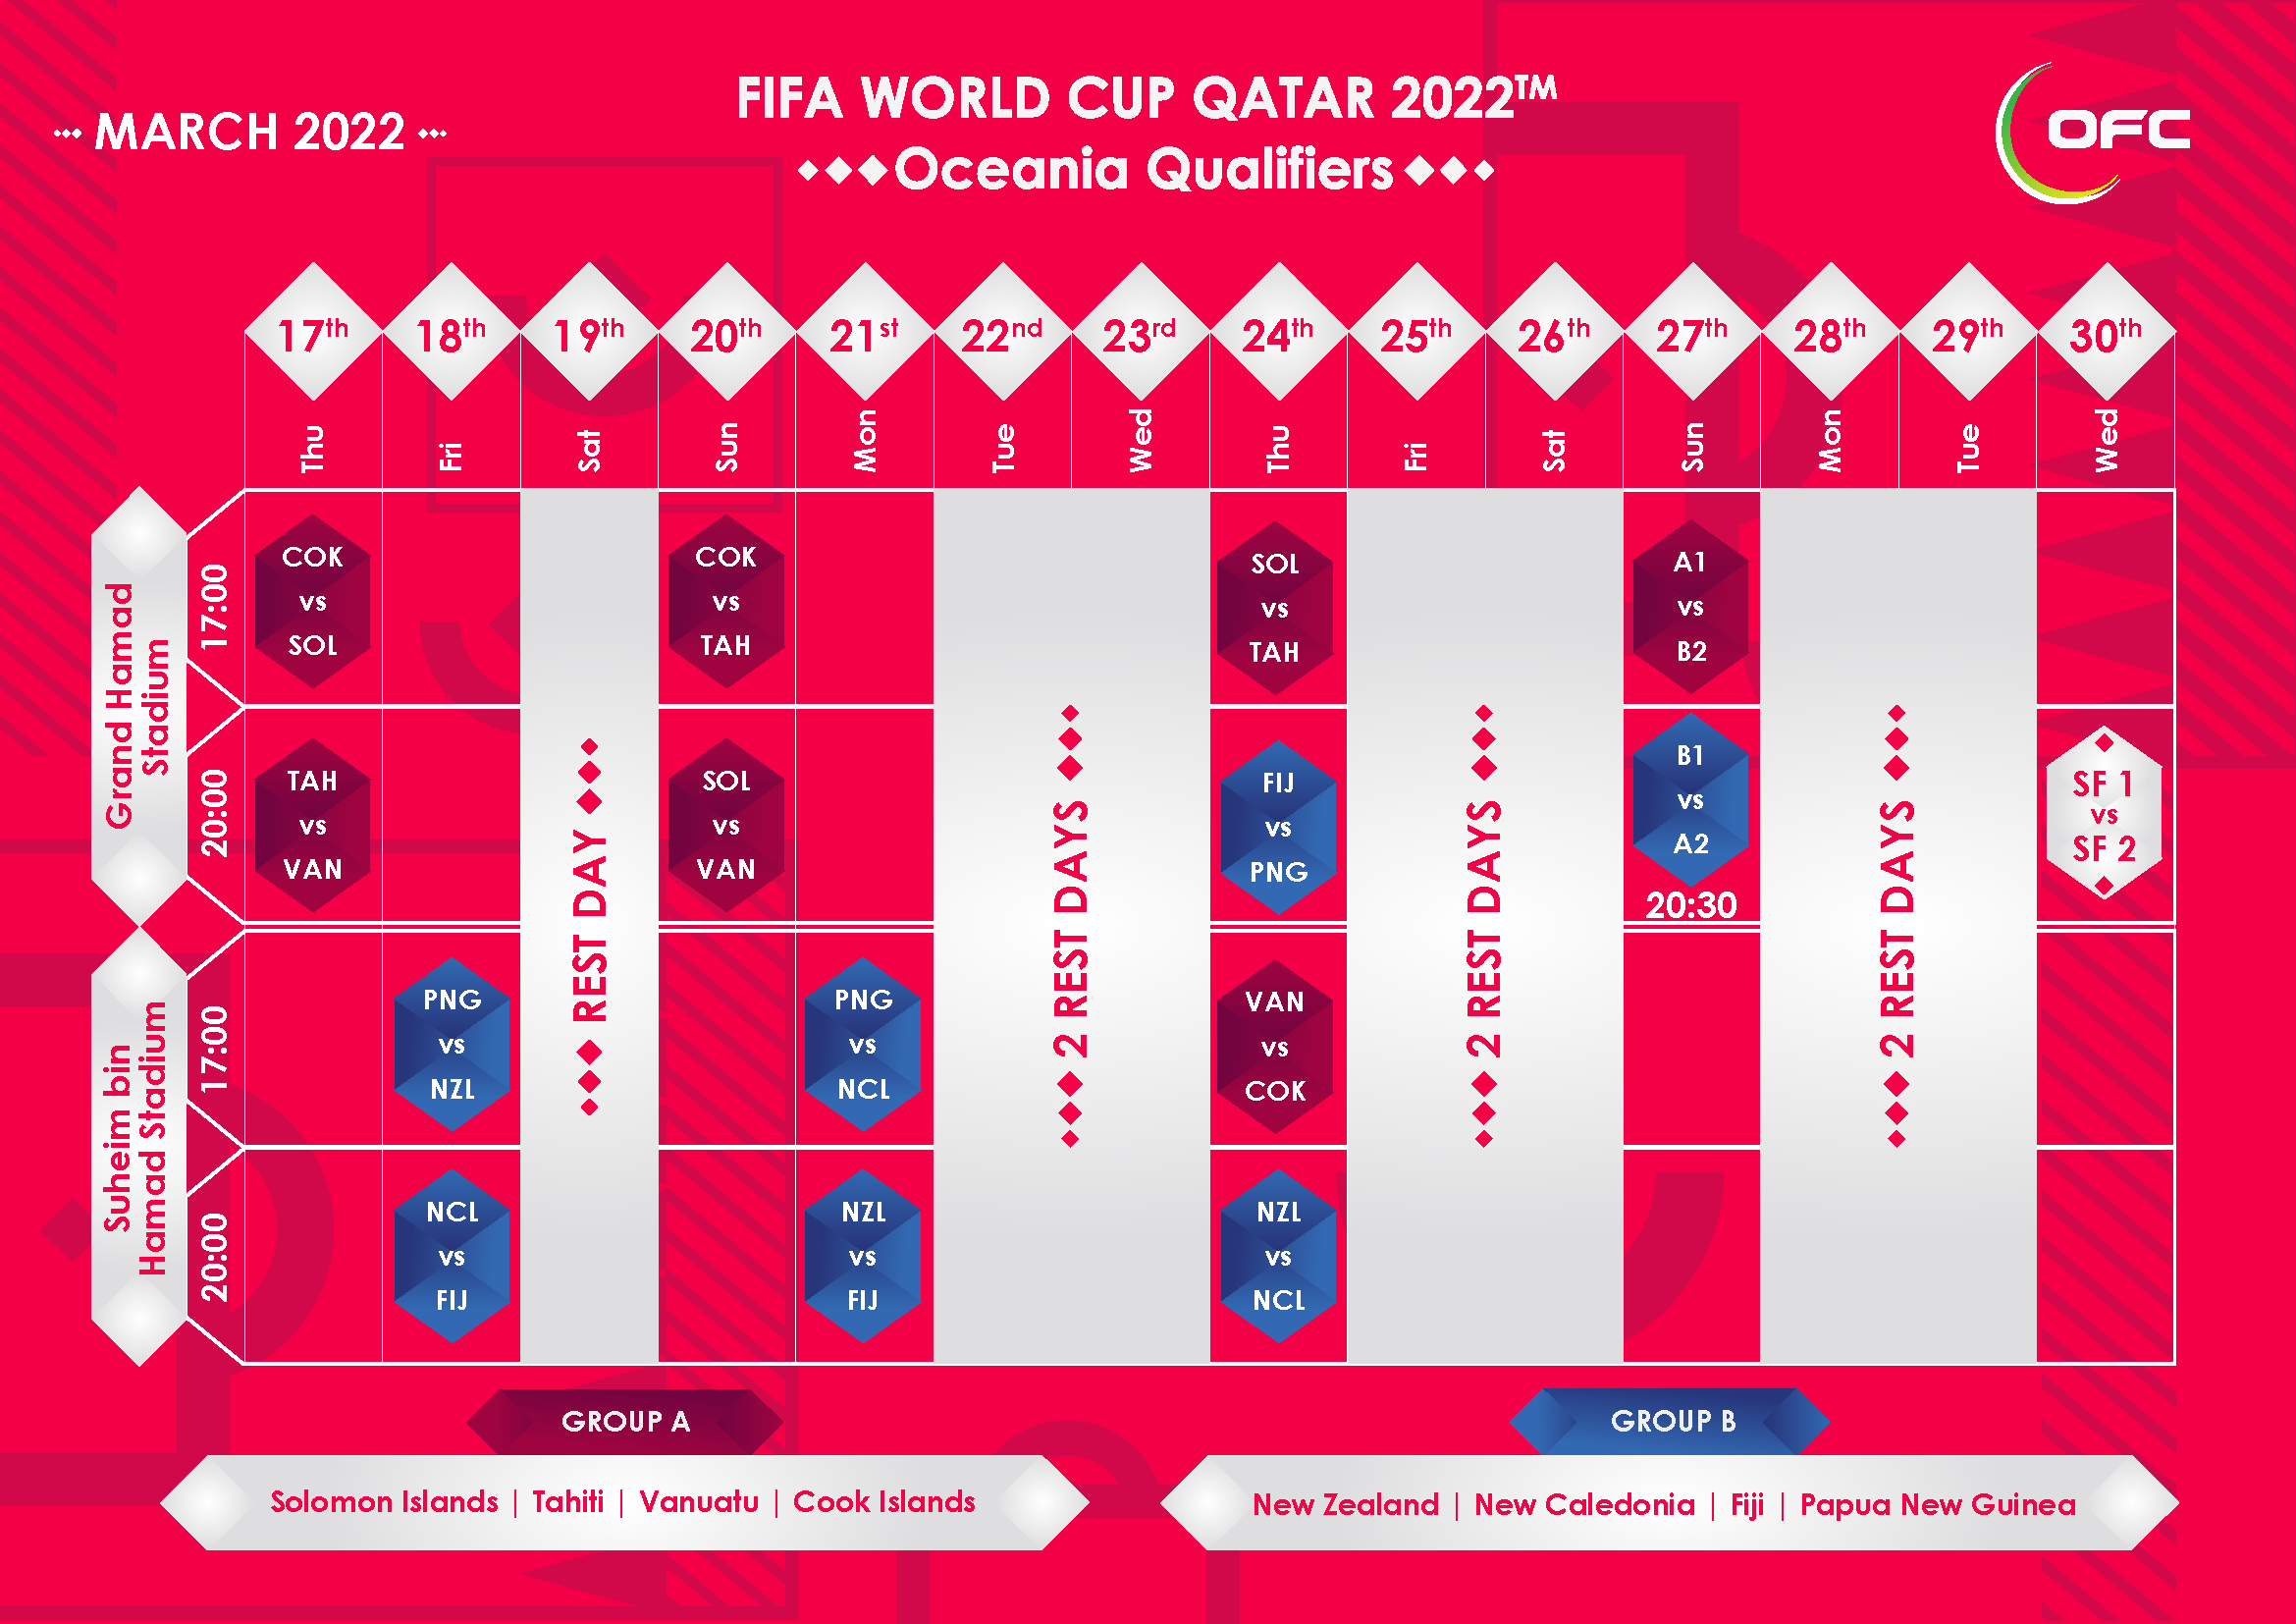 Fifa world cup 2022 schedule